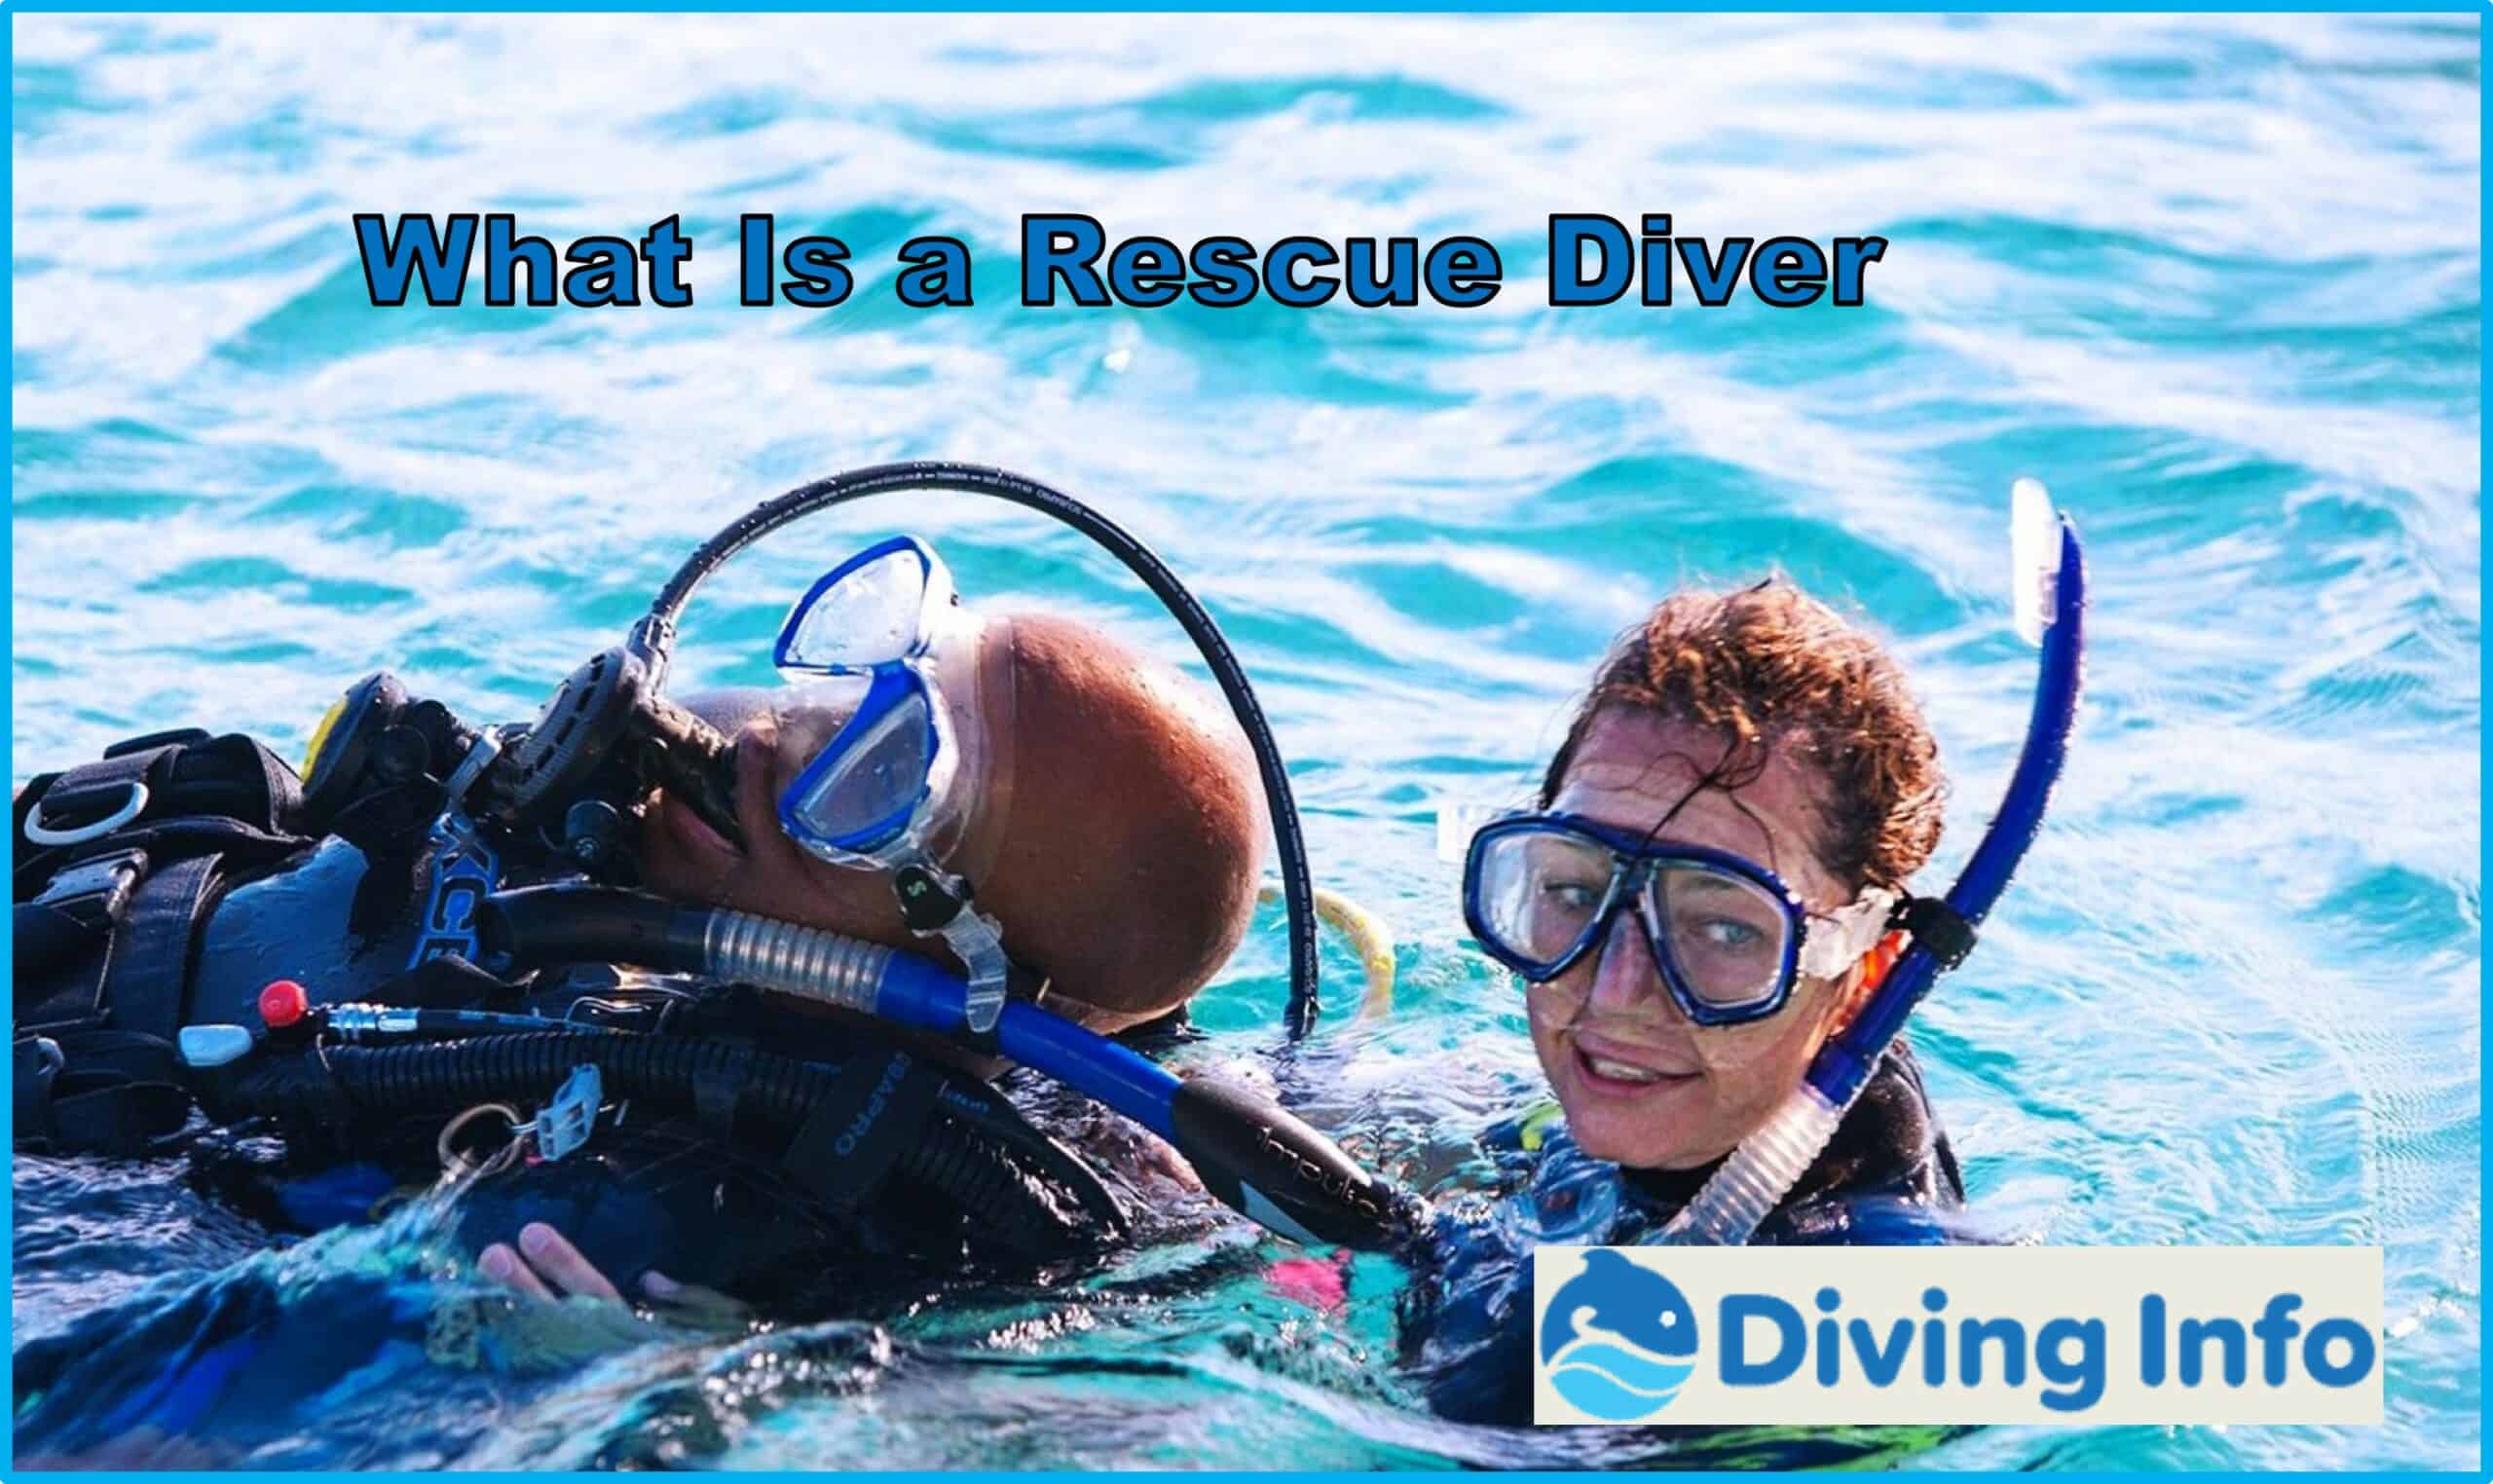 What Is a Rescue Diver